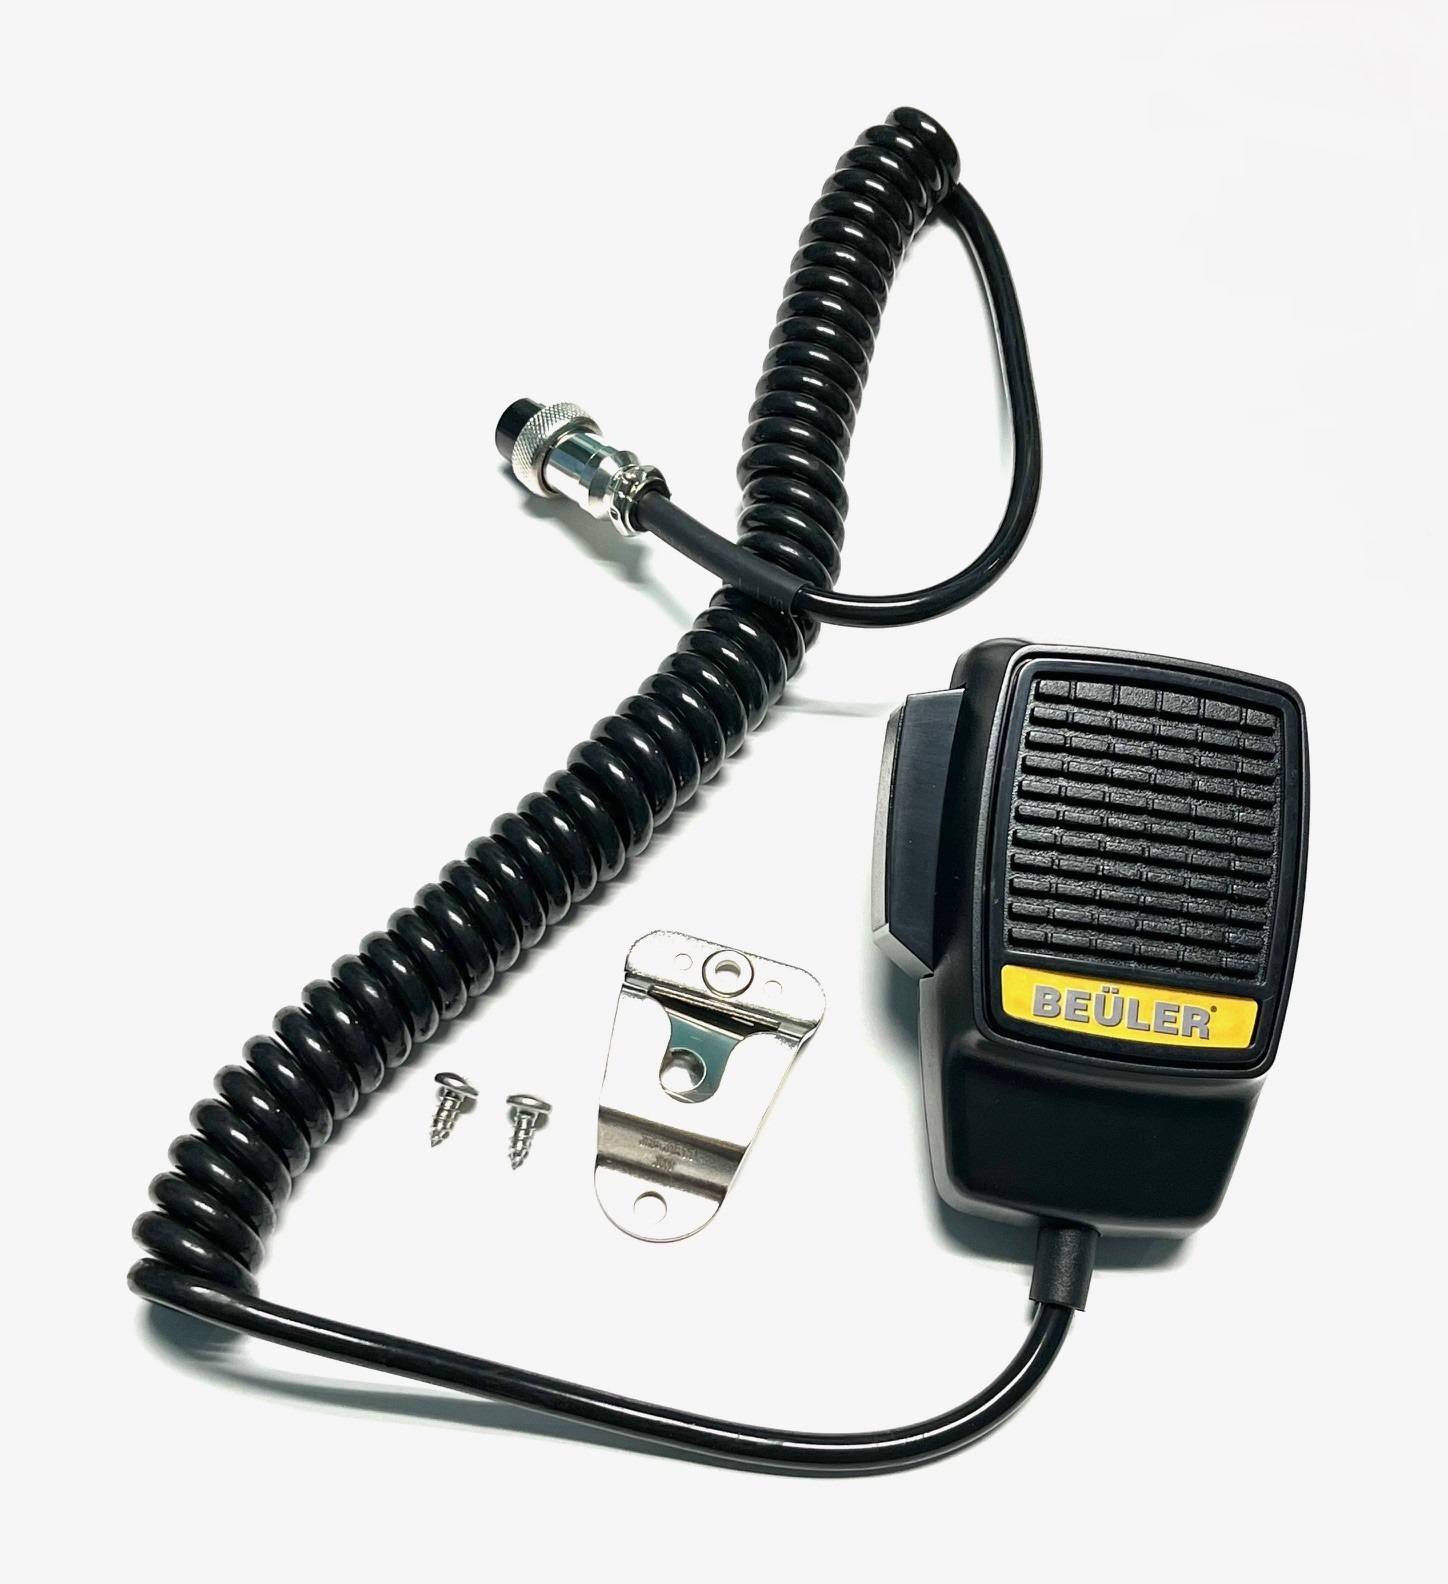 Beuler Dynamic Microphone with 4-pin connect